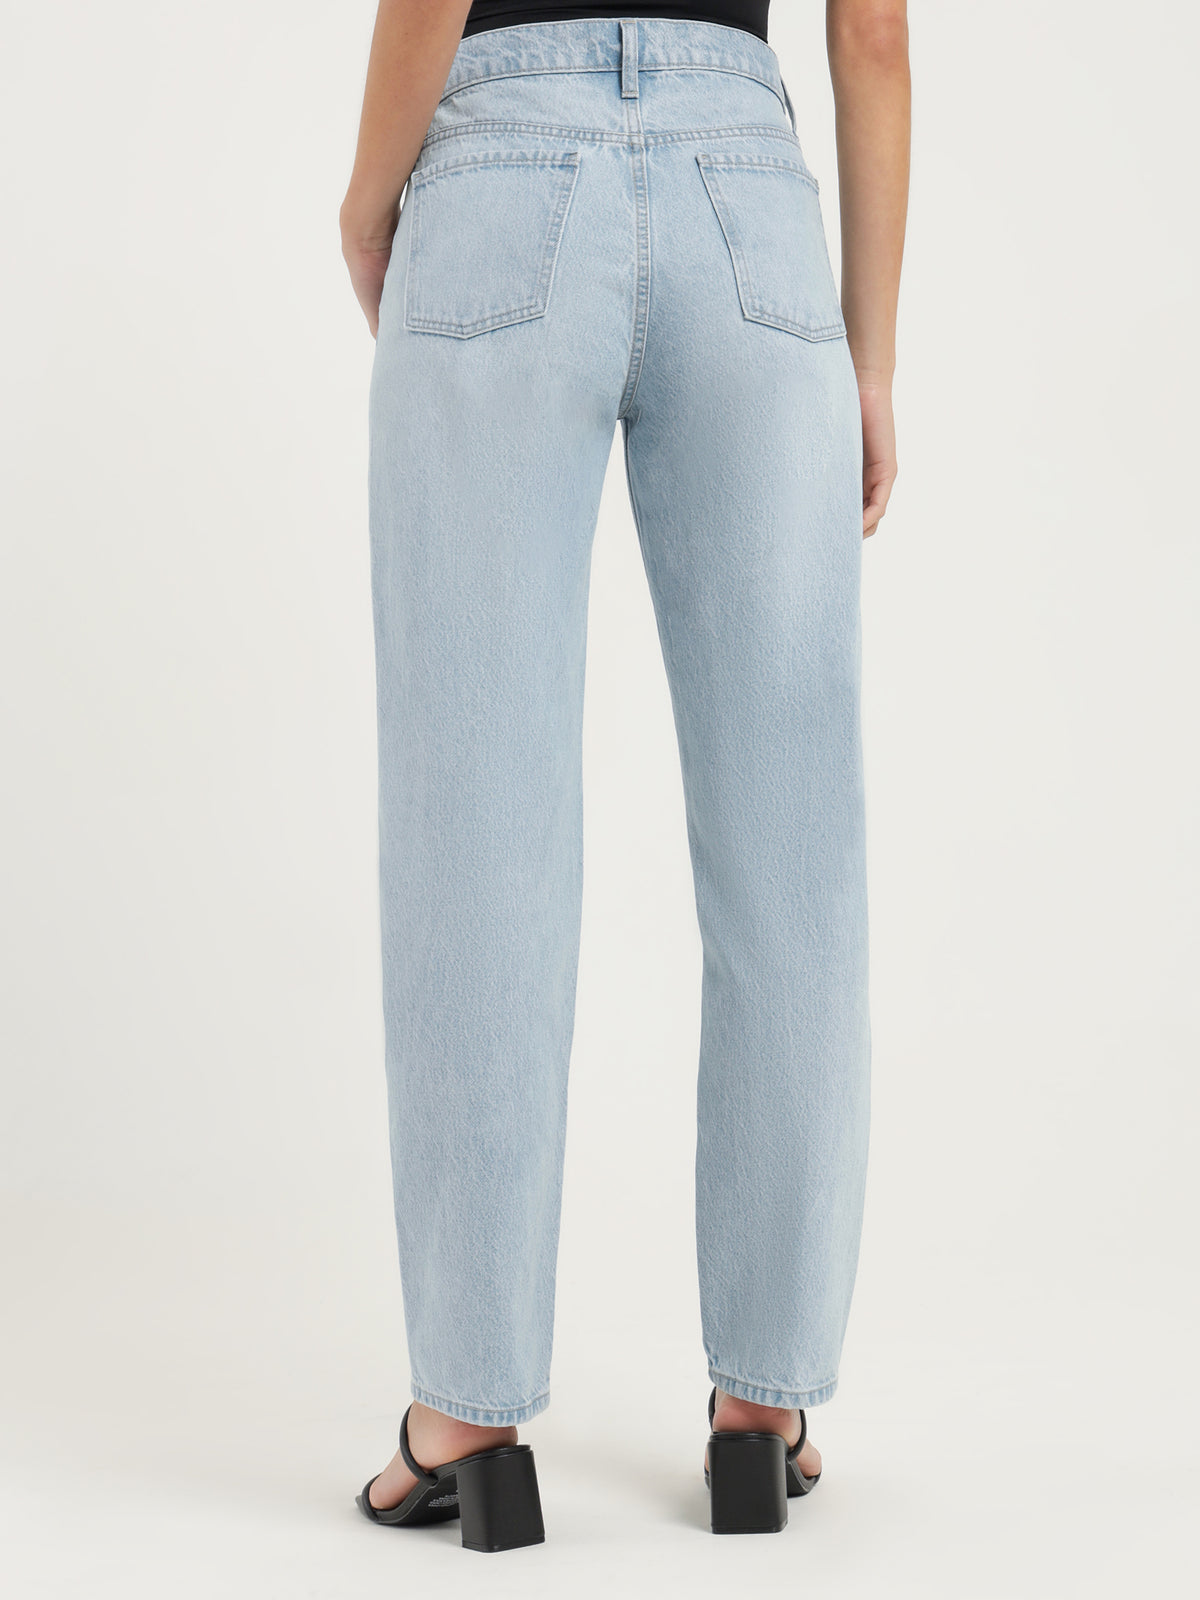 Maude Crossover Jeans in Dizzy Blue